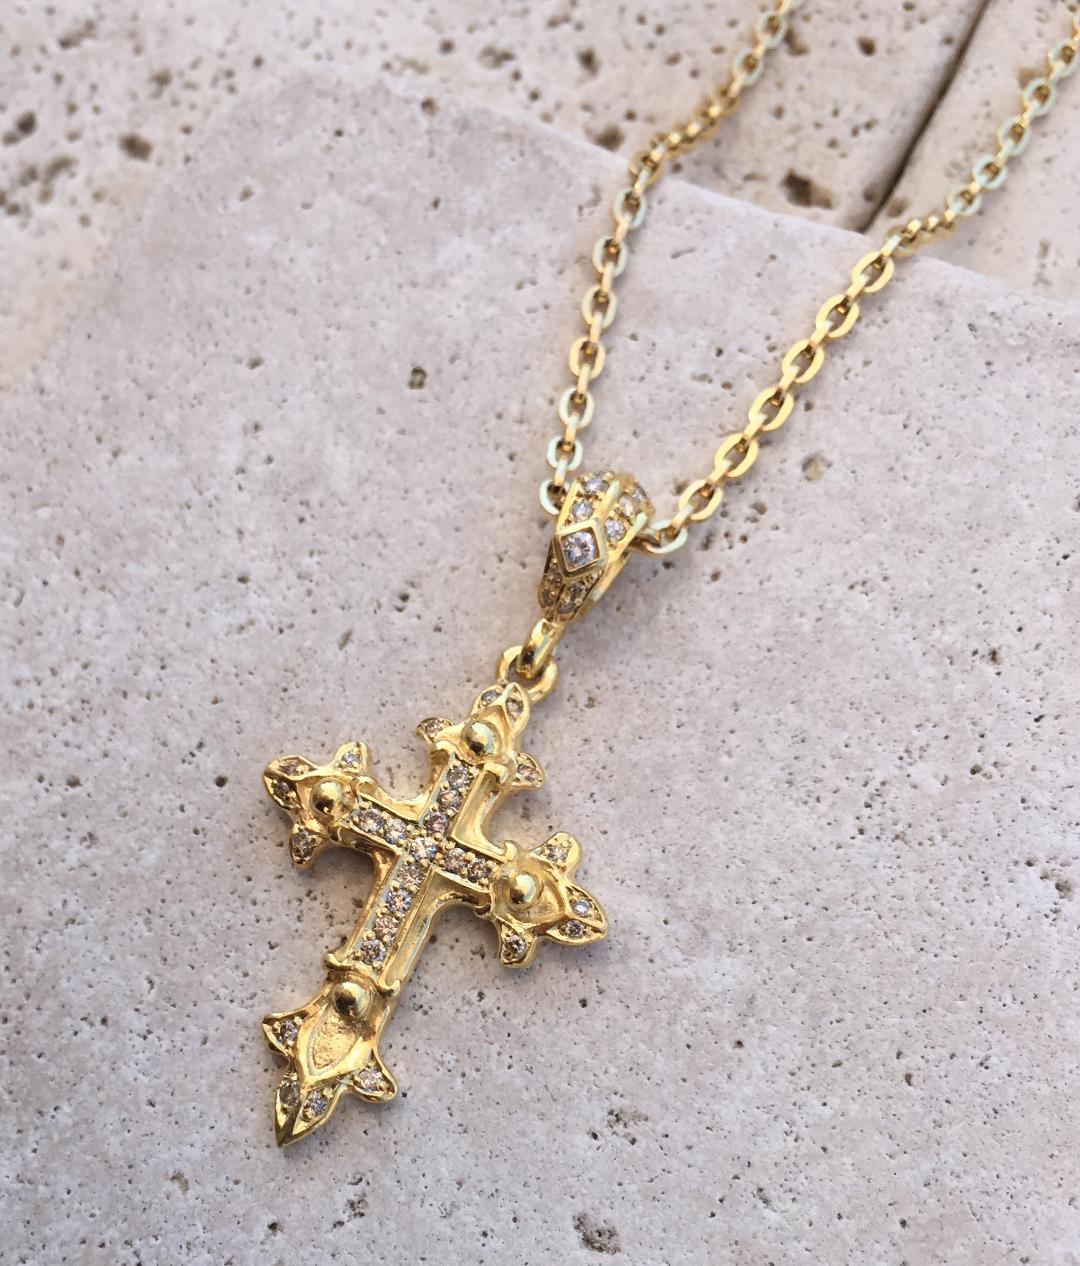 Necklace - Golden Double Cross in silver with Diamonds by Roman Paul